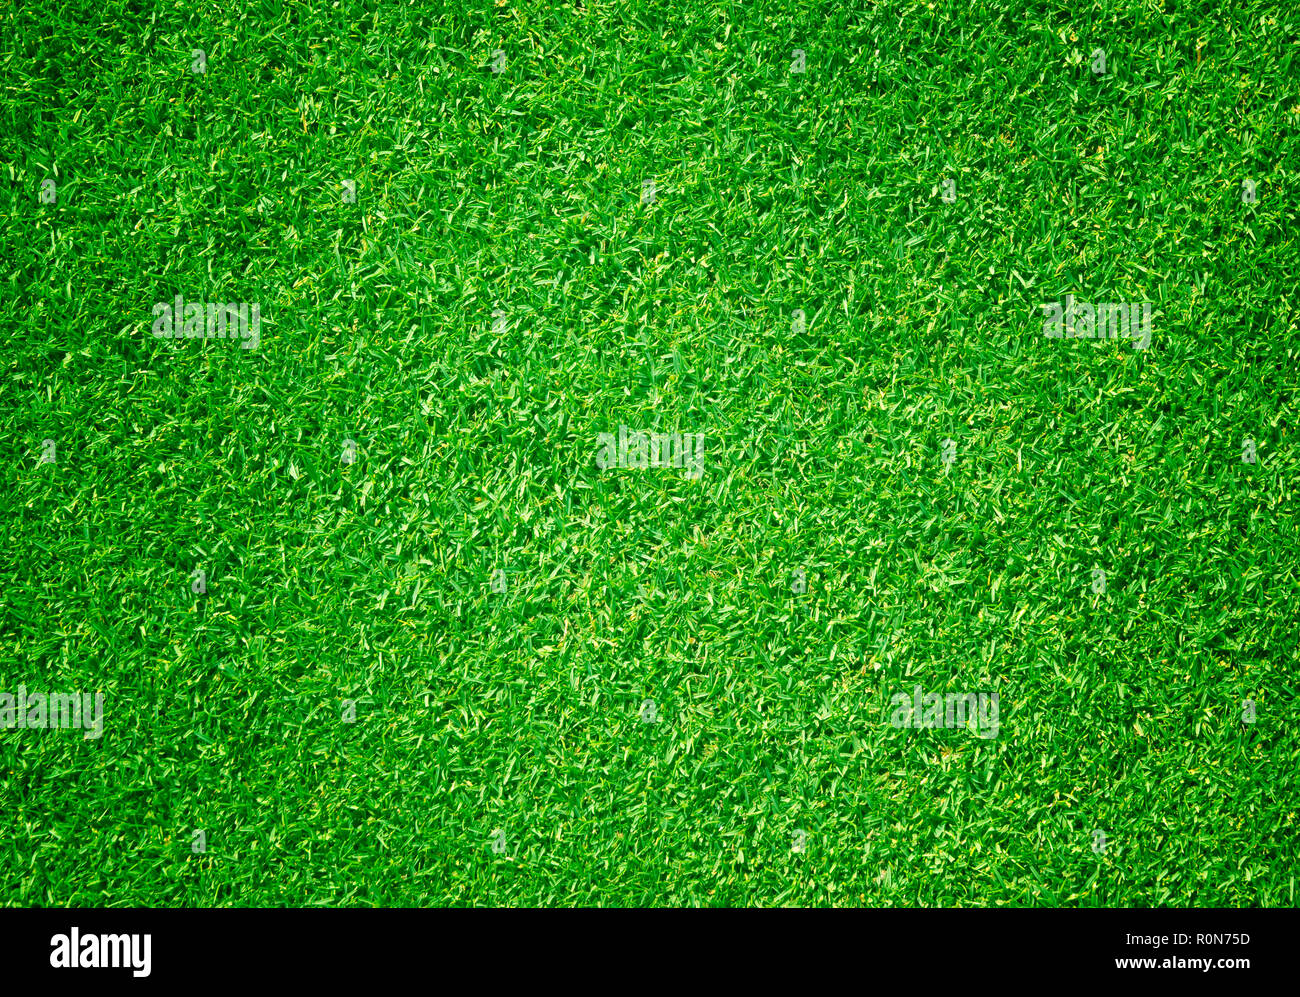 Natural background of green grass Small grass football ground Stock Photo